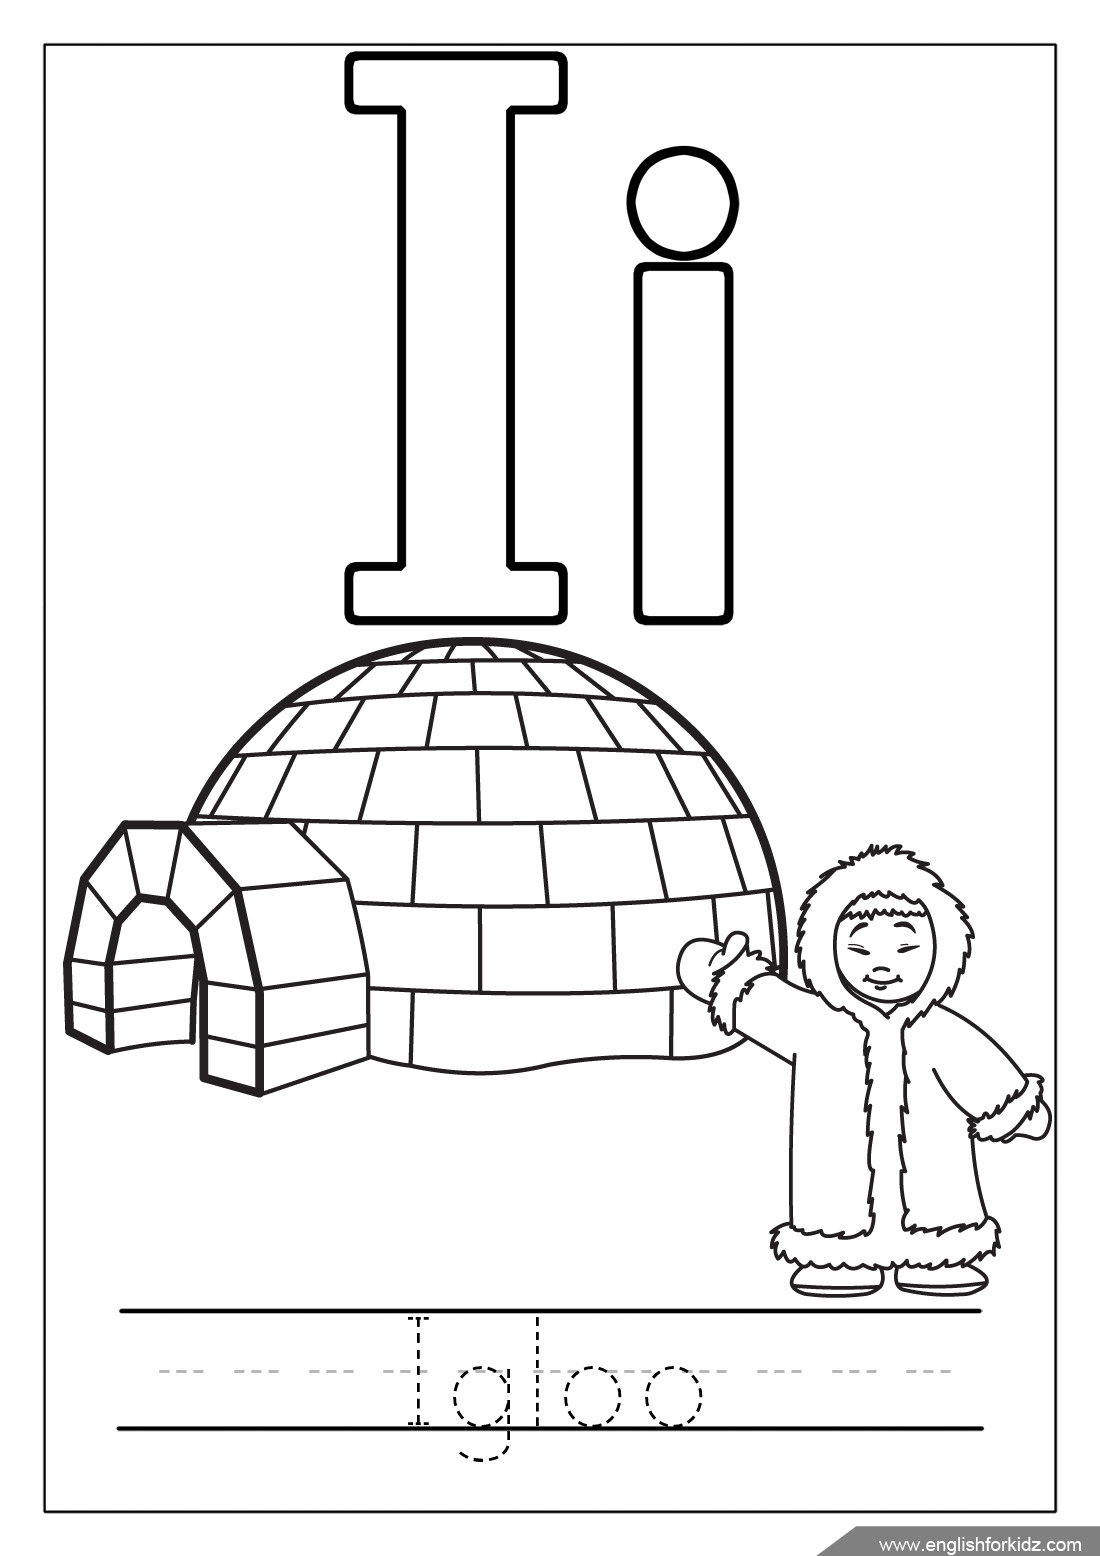 Download Igloo Coloring Pages